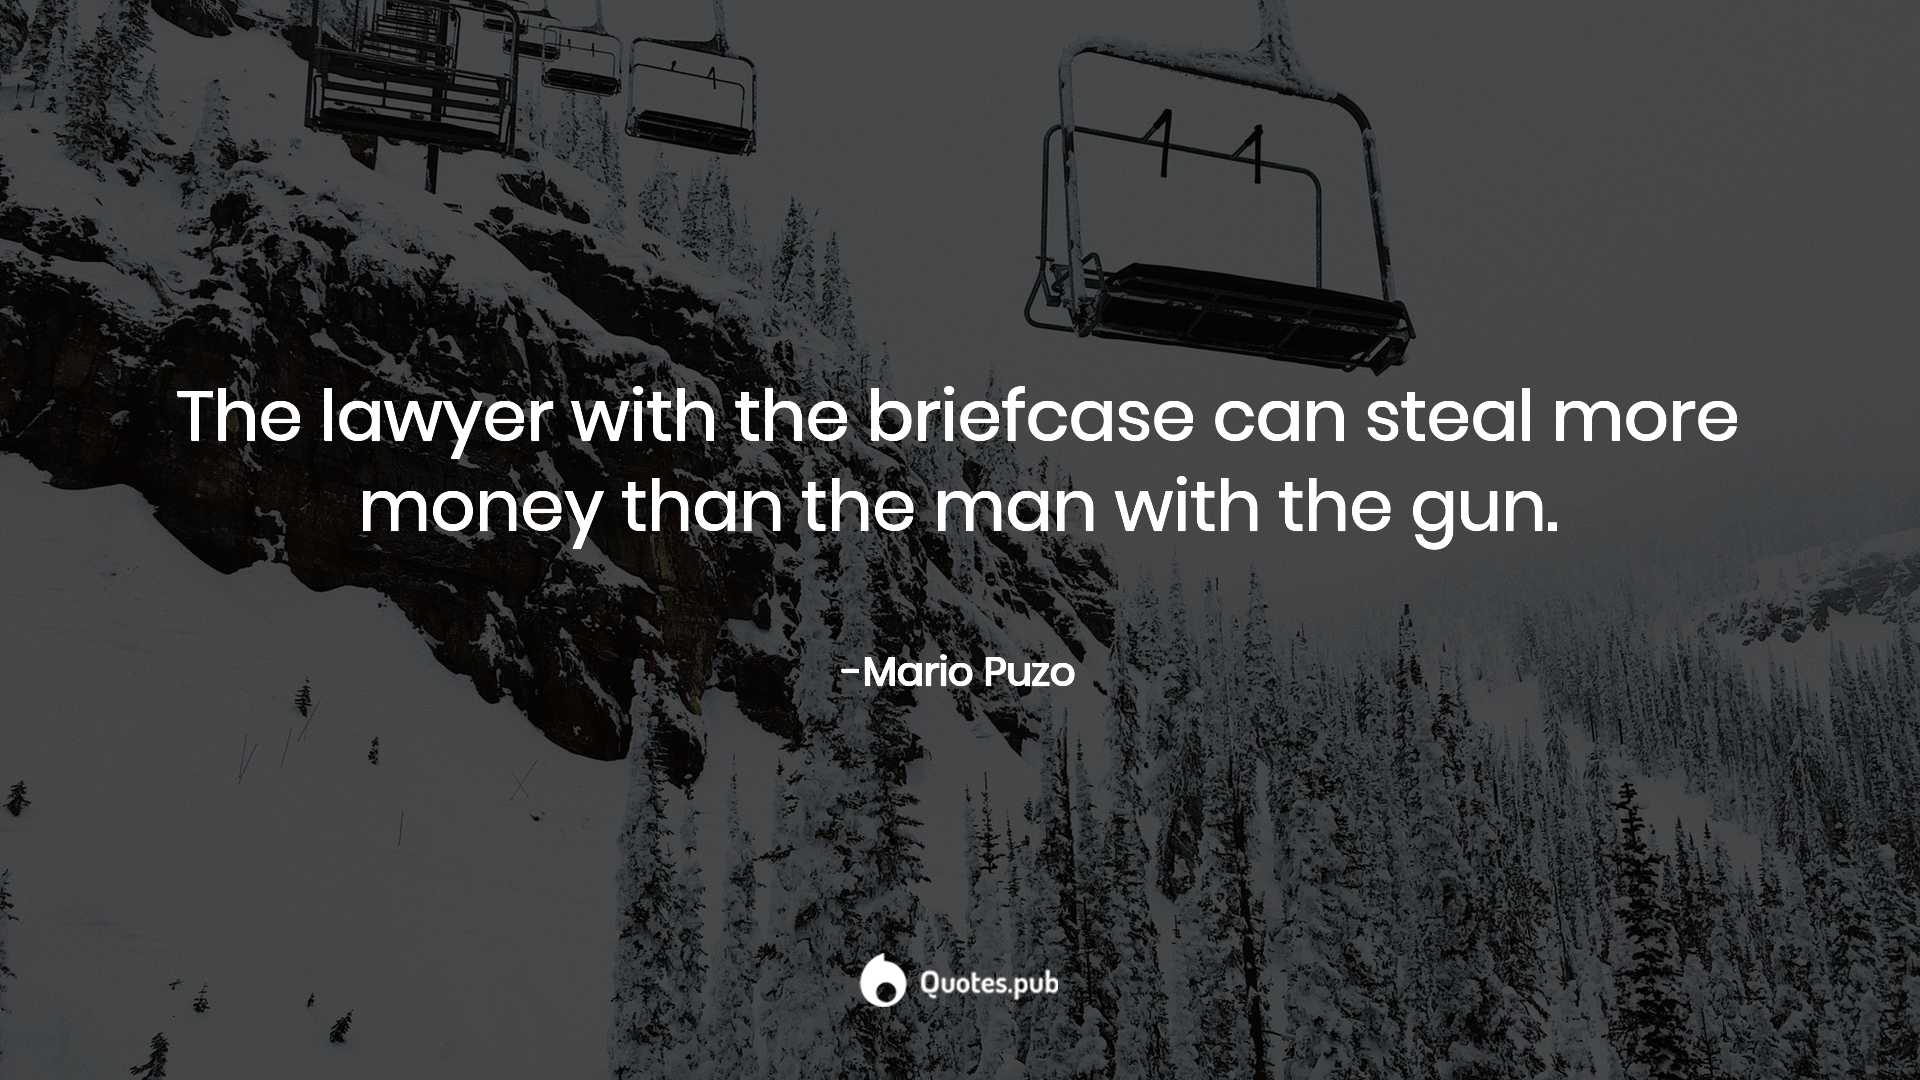 Gangster Quotes Wallpapers